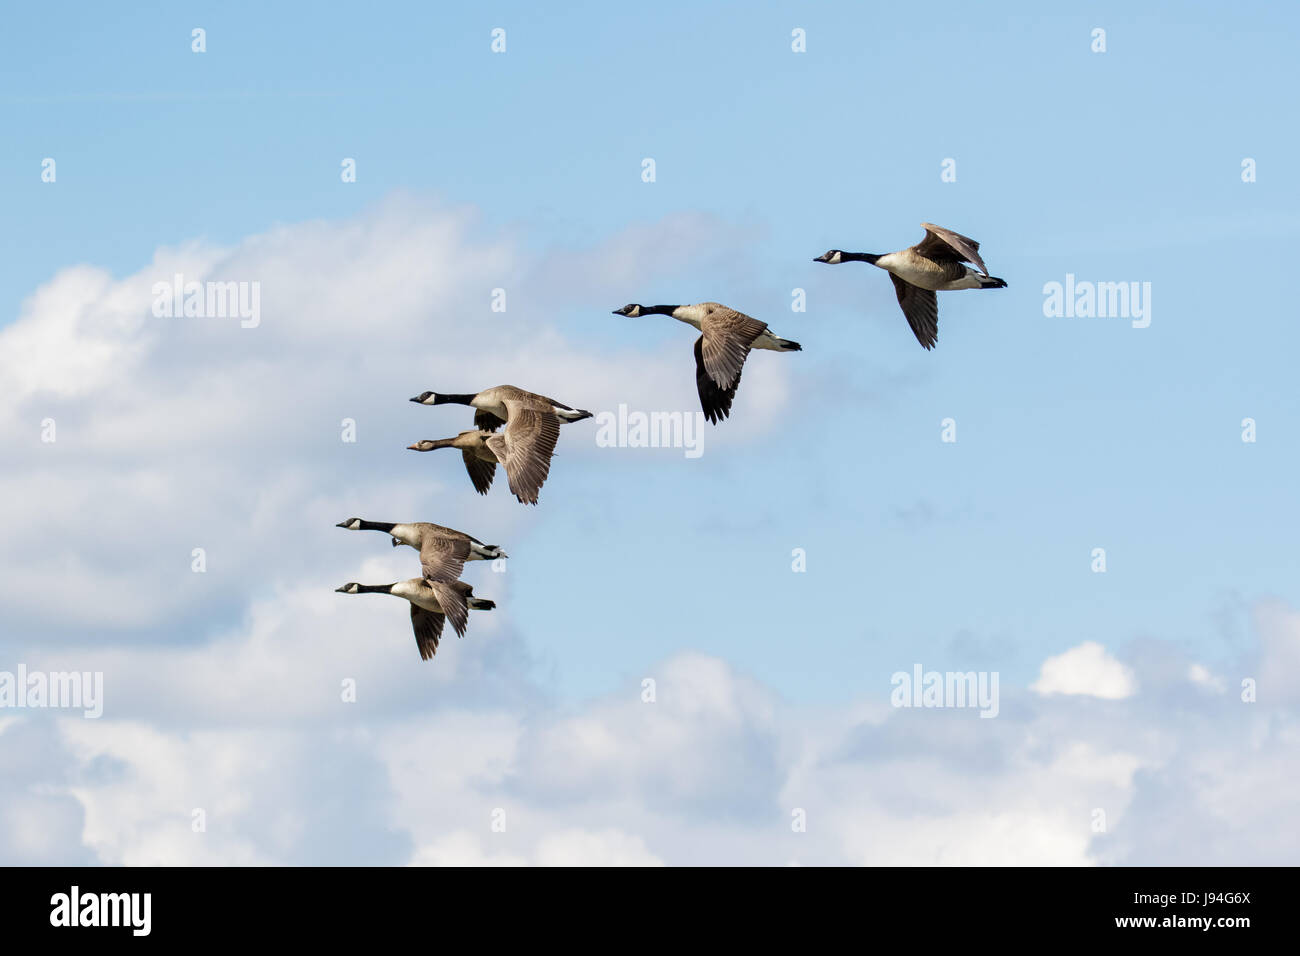 Group or gaggle of Canada Geese (Branta canadensis) flying, in flight against fluffy white clouds Stock Photo